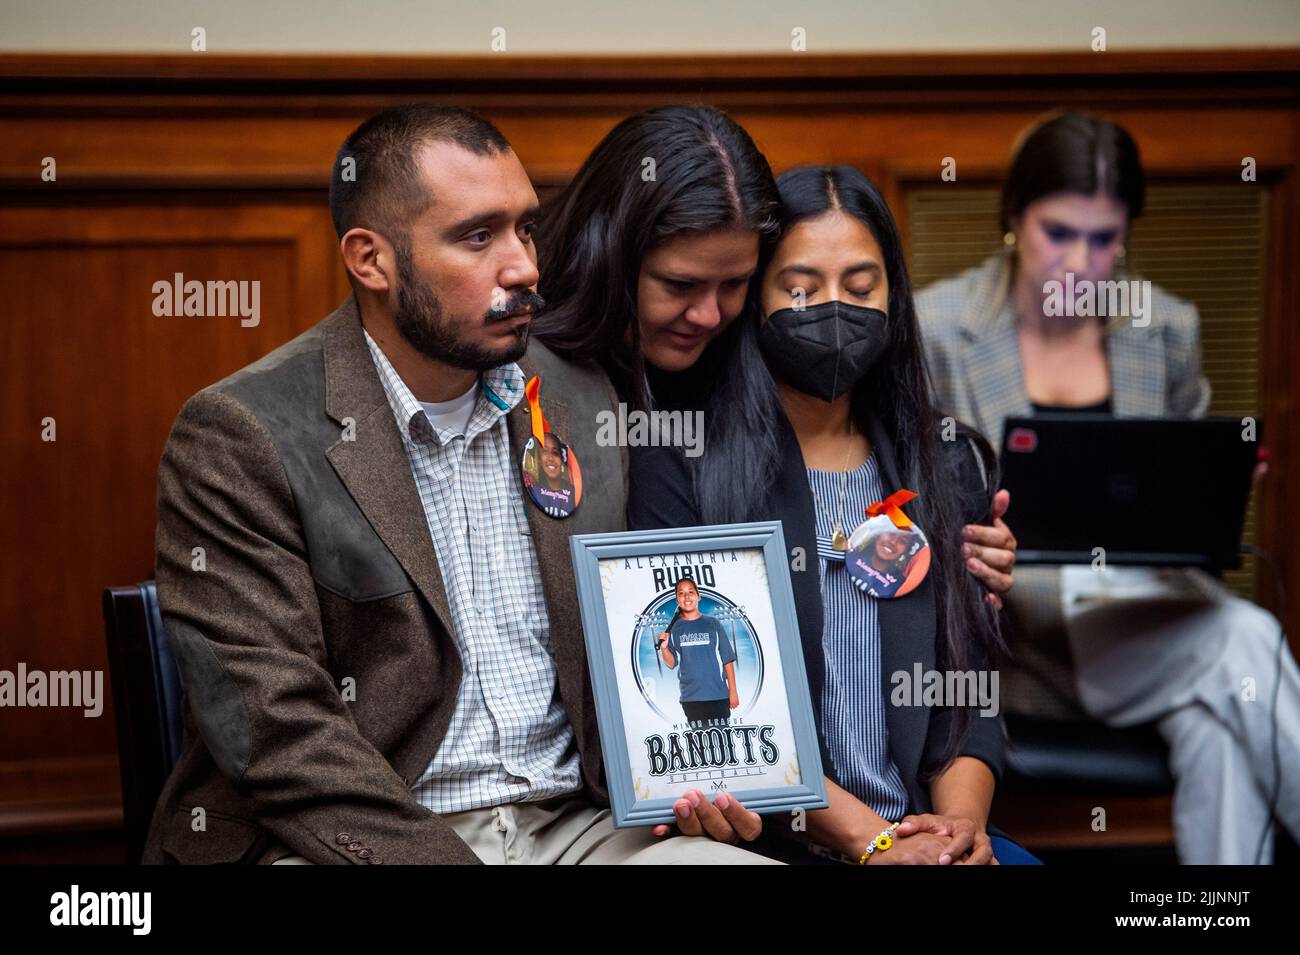 Gloria Cazares, center, whose nine year-old daughter Jacklyn was one of the children killed by a gunman at Robb Elementary School in Uvalde, Texas, comforts Felix Rubio, left, and Kimberly Rubio, right, whose daughter Alexandria Rubio was one of the children killed by a gunman at Robb Elementary School in Uvalde, Texas, during a House Committee on Oversight and Reform hearing “Examining the Practices and Profits of Gun Manufacturers” in the Rayburn House Office Building in Washington, DC, July 27, 2022. Credit: Rod Lamkey/CNP /MediaPunch Stock Photo